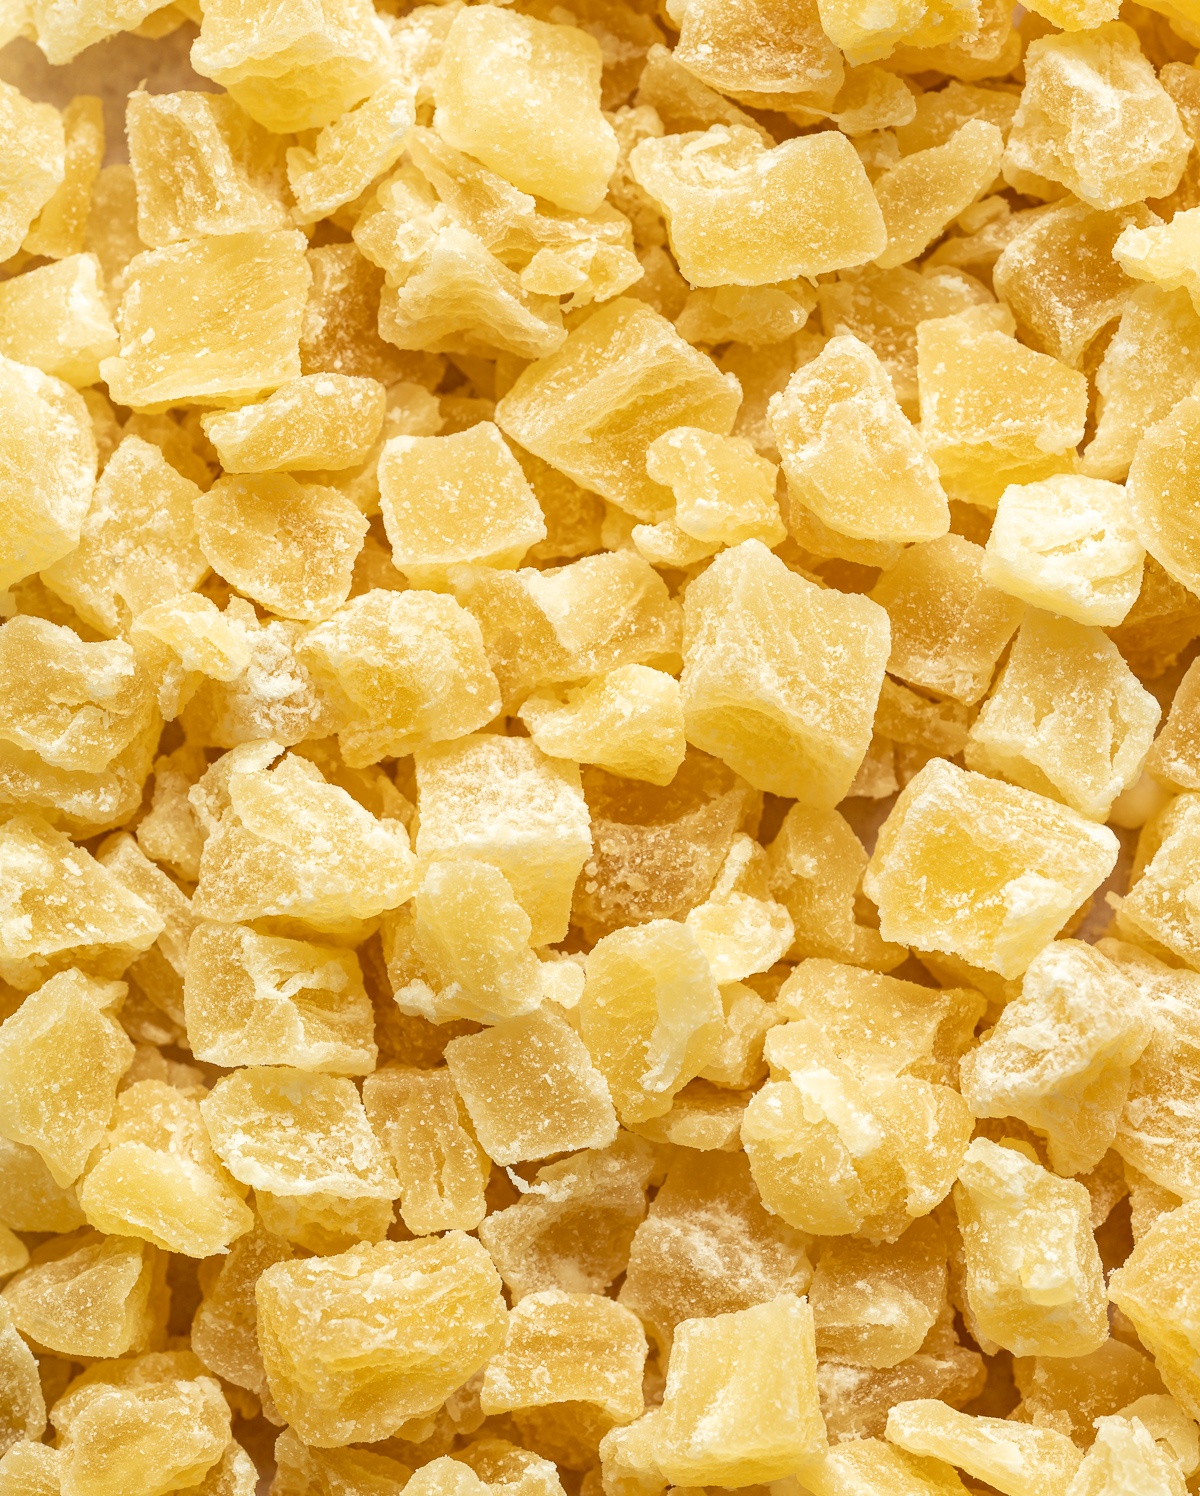 yellow dried sugared pineapple pieces